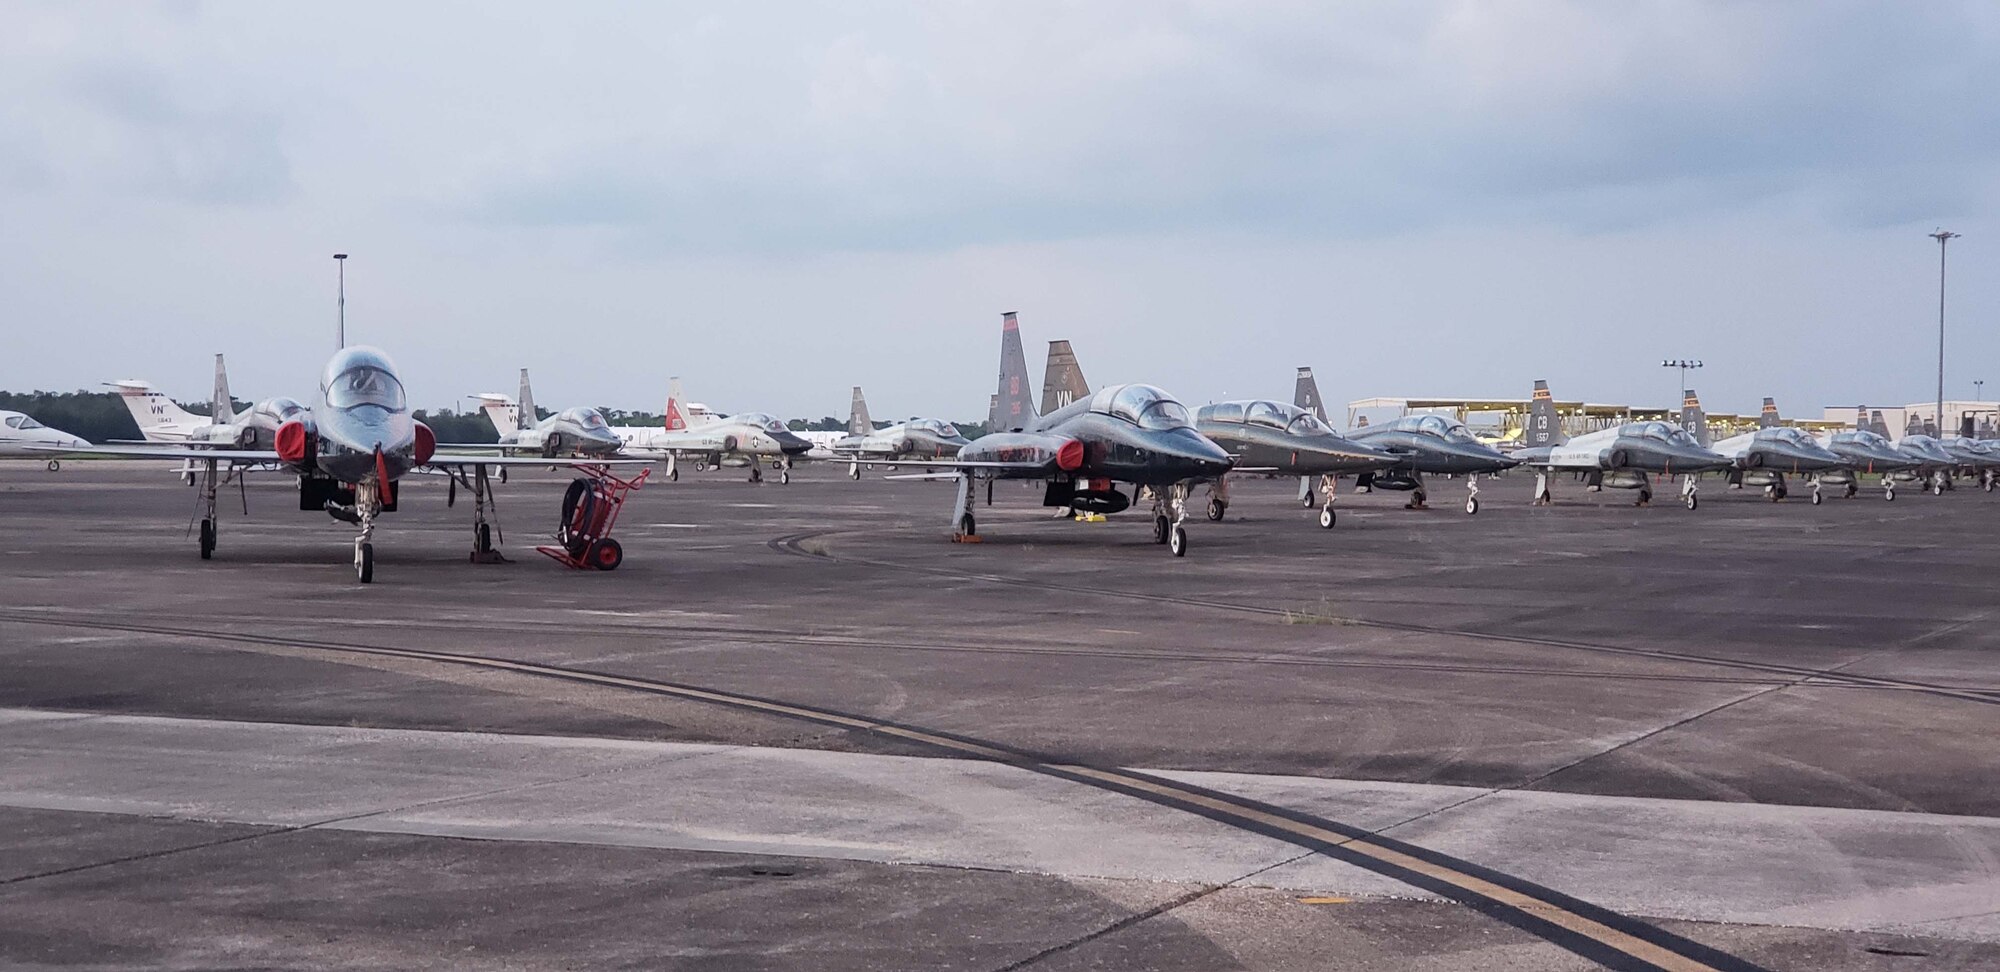 A row of parked T-38 Talon aircraft in the foreground and a row of T-1 Jayhawk aircraft in the background sit on the ramp at Naval Air Station Fort Worth Joint Reserve Base, New Orleans, Aug. 9, 2019, during FAIP Flag. Instructor pilots from all over the country fly in to participate in the event, including pilots who have moved on from being instructor pilots. (U.S. Air Force photo by Capt. Gared Chapman)